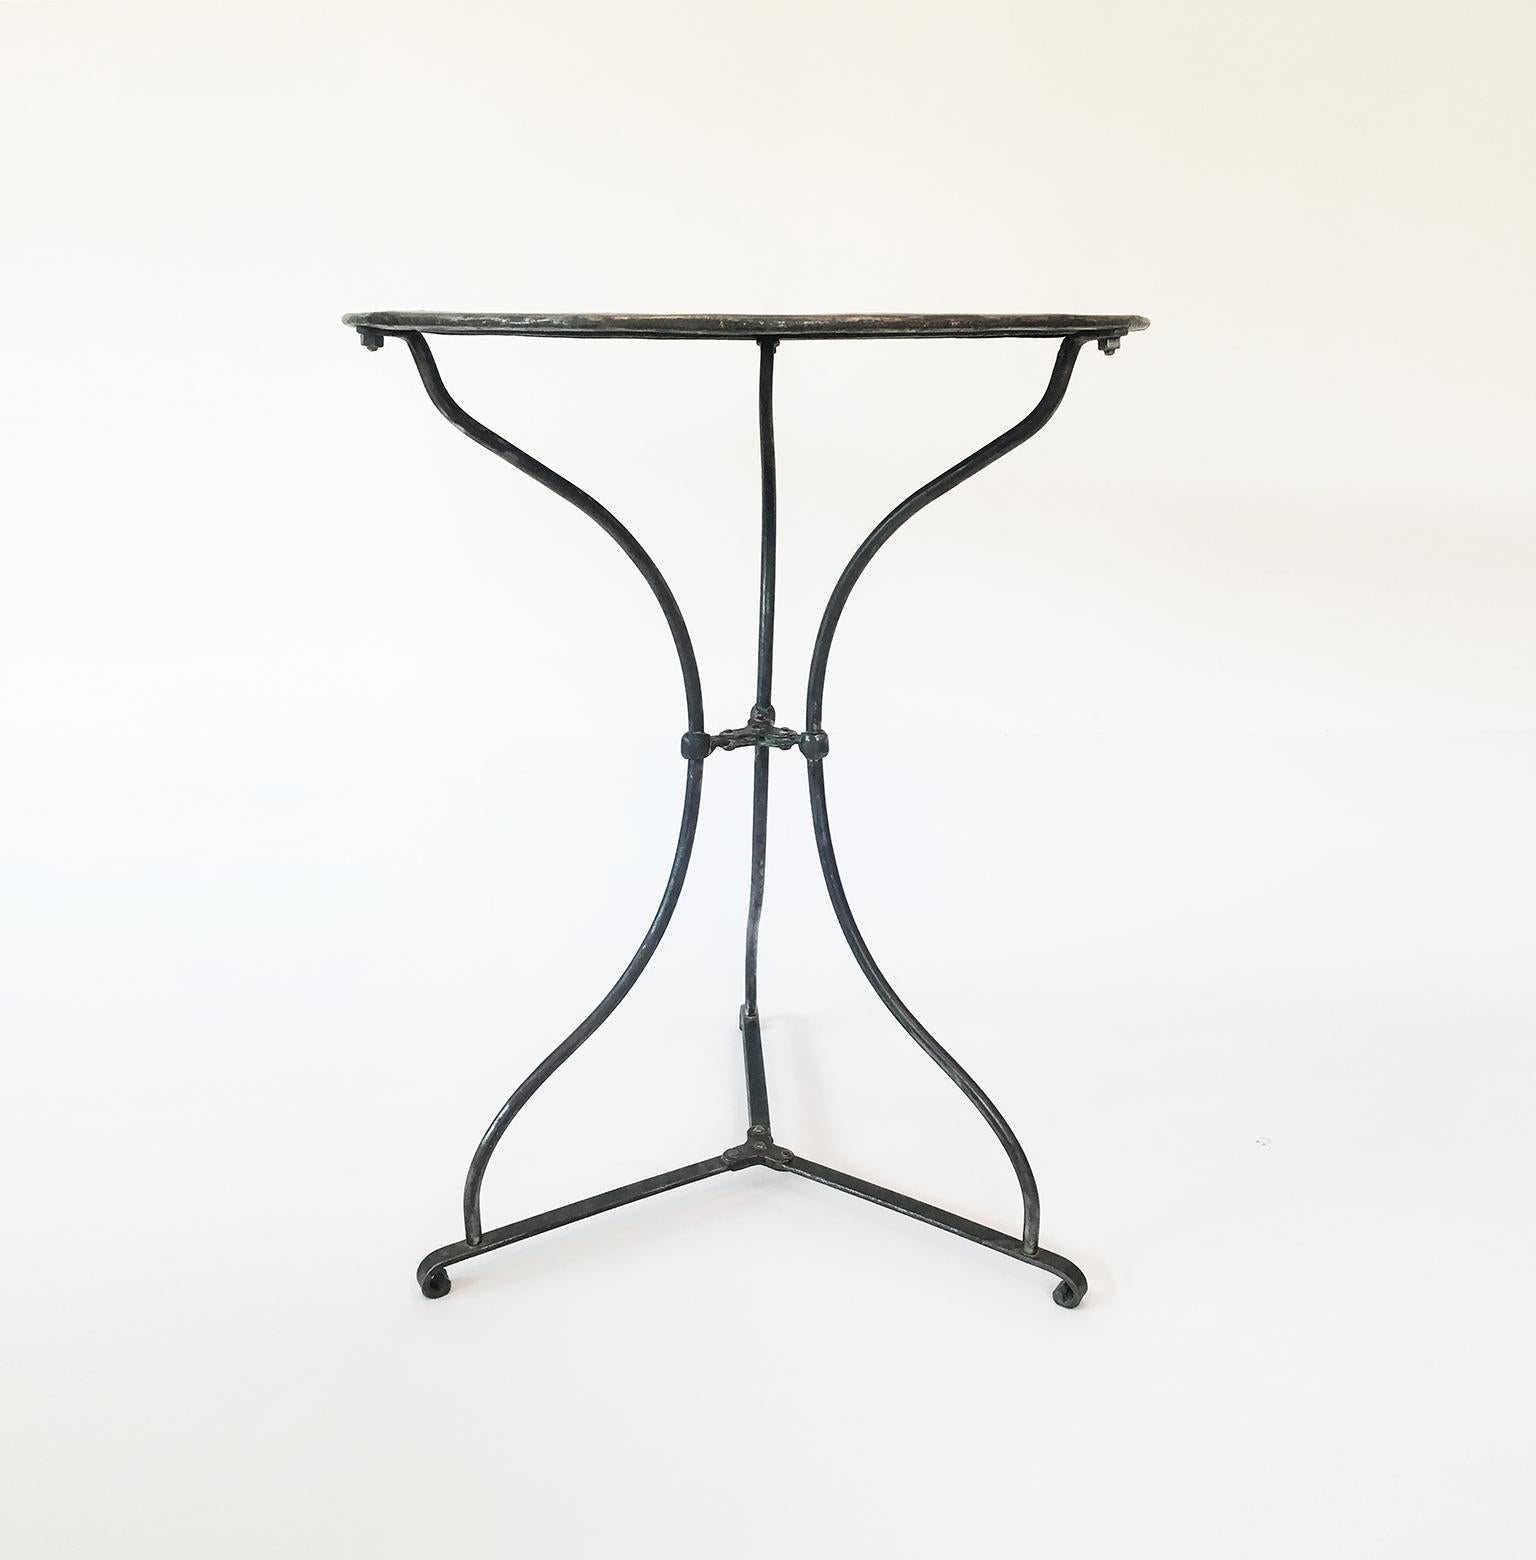 French bistro table, made of iron, wonderful aged patina, circa 1920.